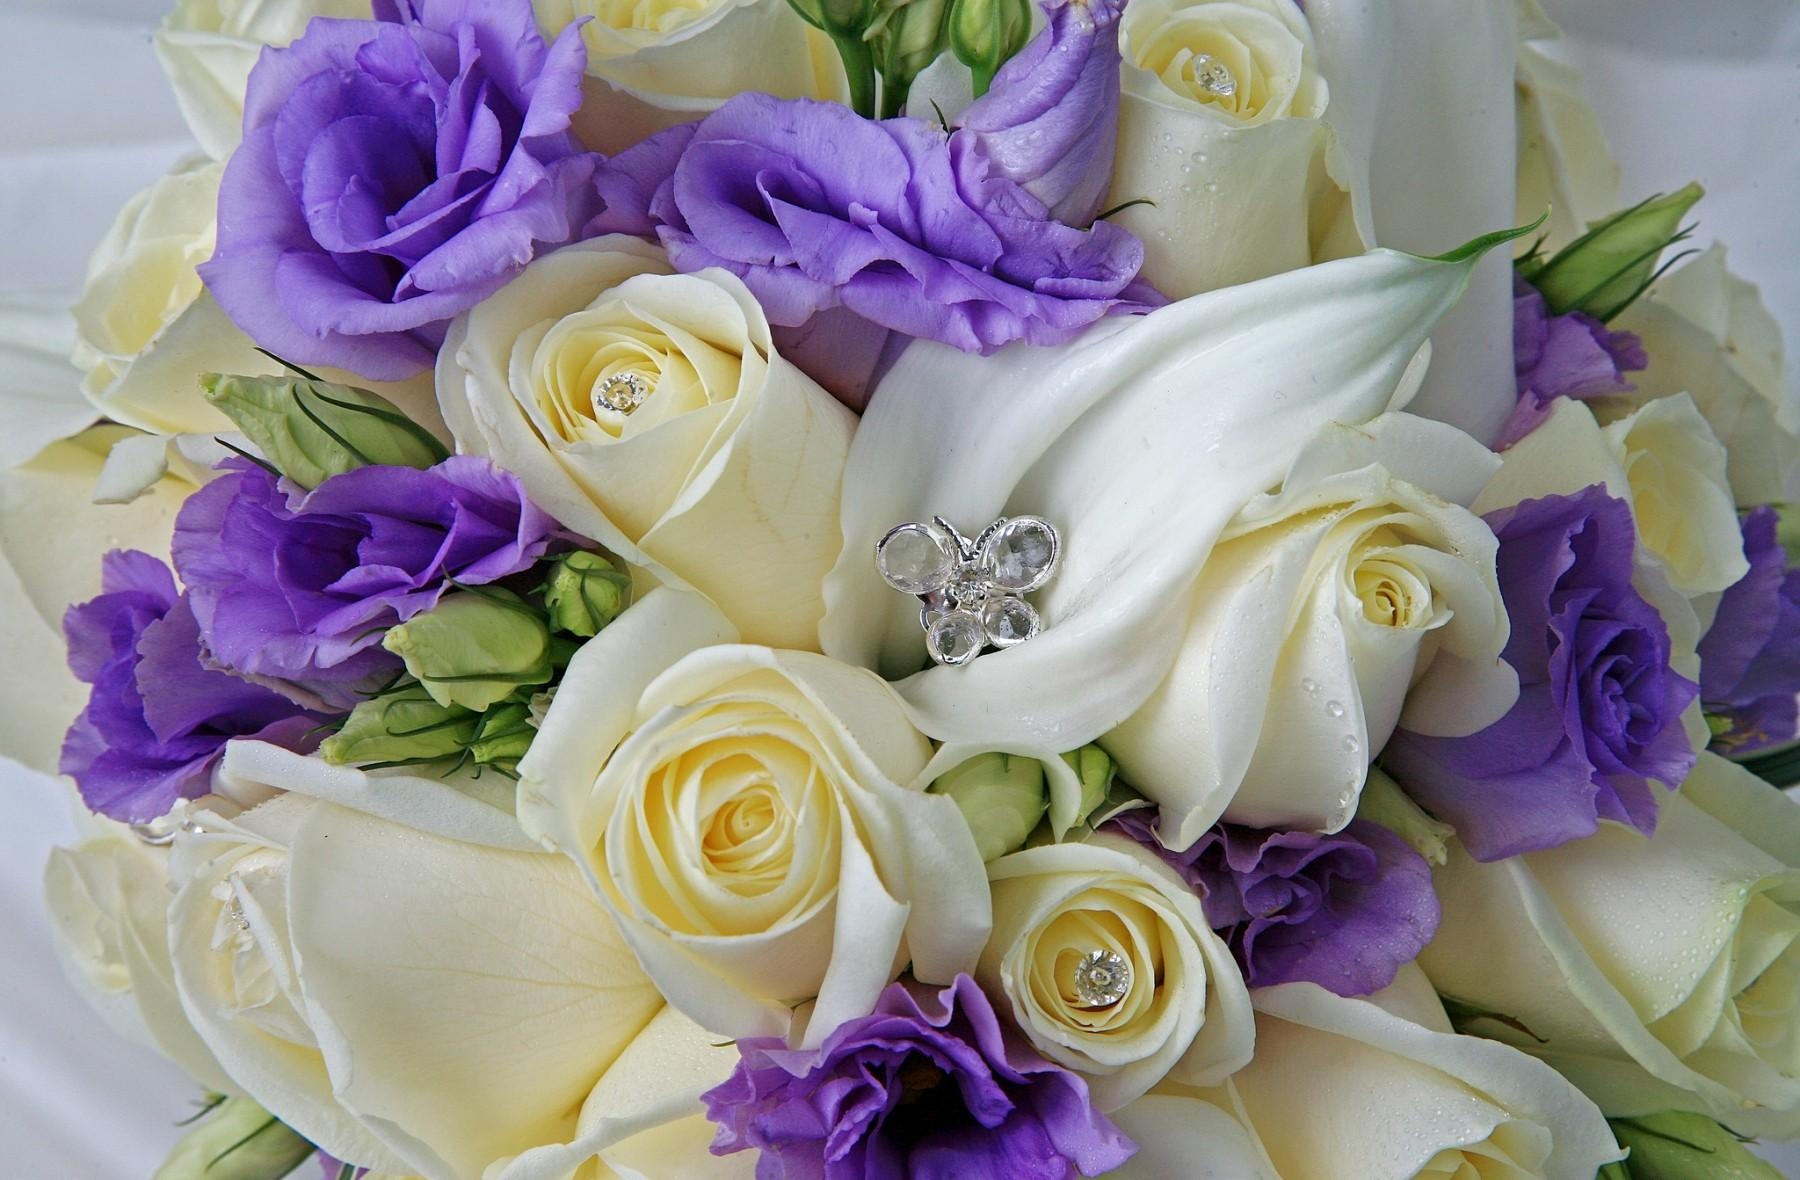 drops, roses, flowers, decorations, bouquet, lisiantus russell, lisianthus russell Smartphone Background